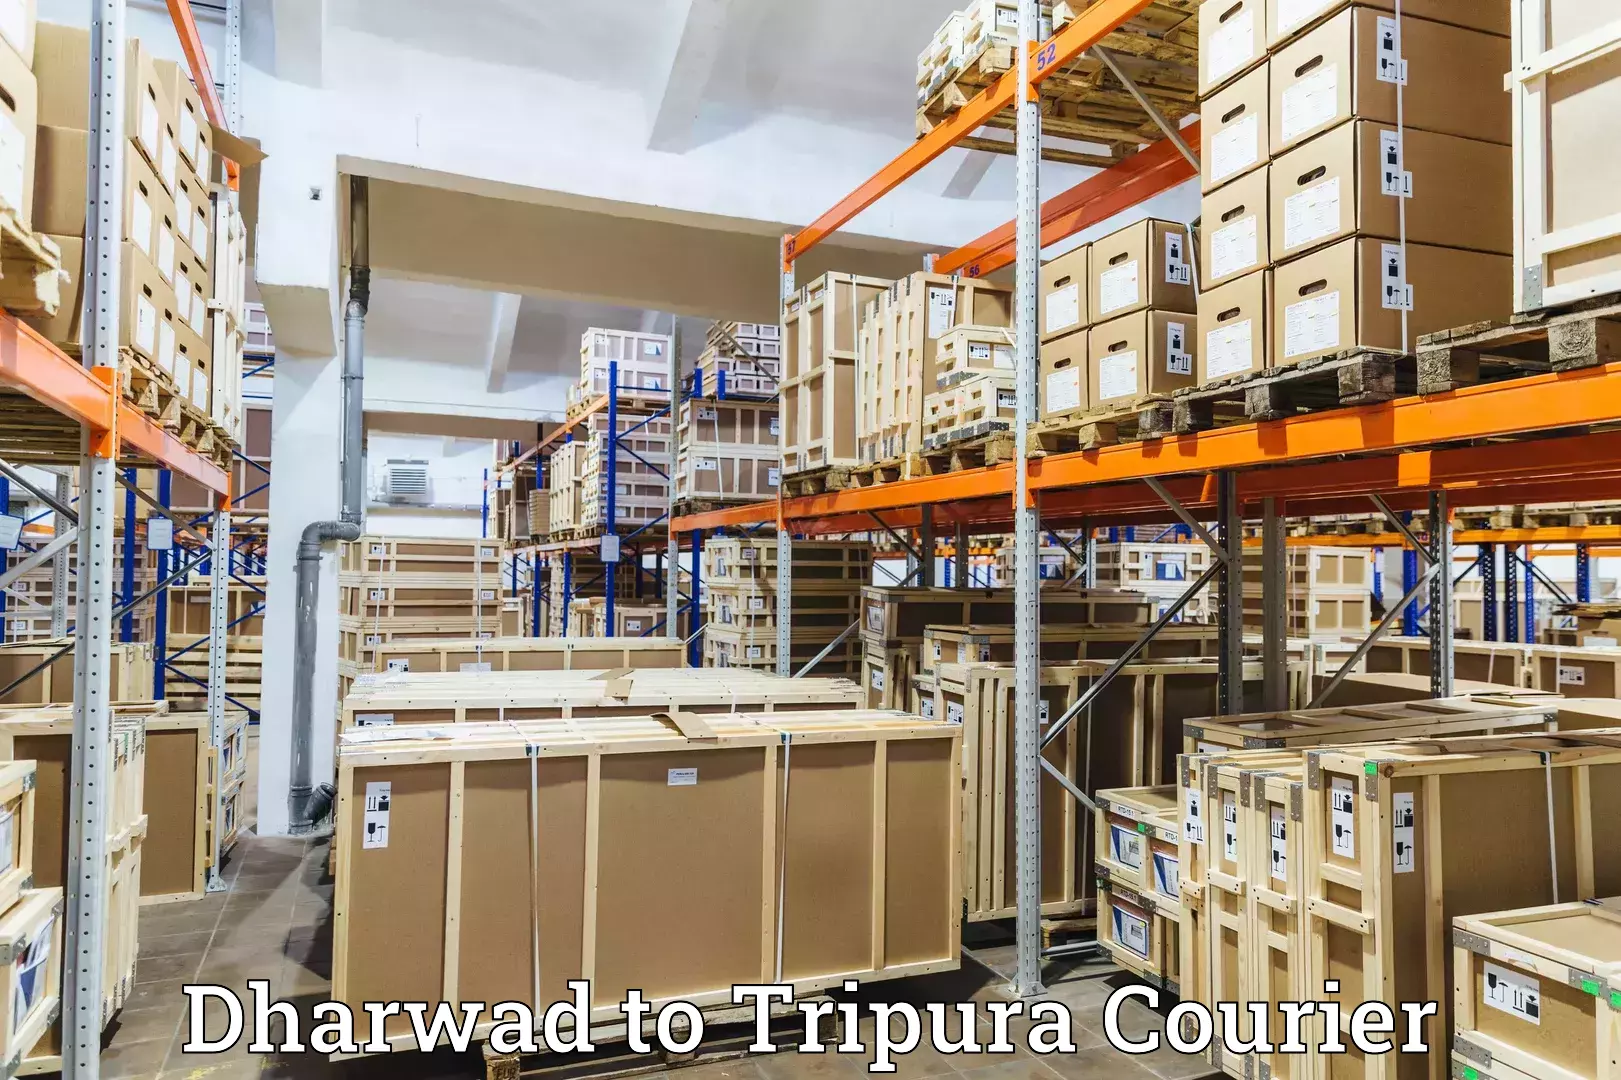 Customer-centric shipping Dharwad to South Tripura